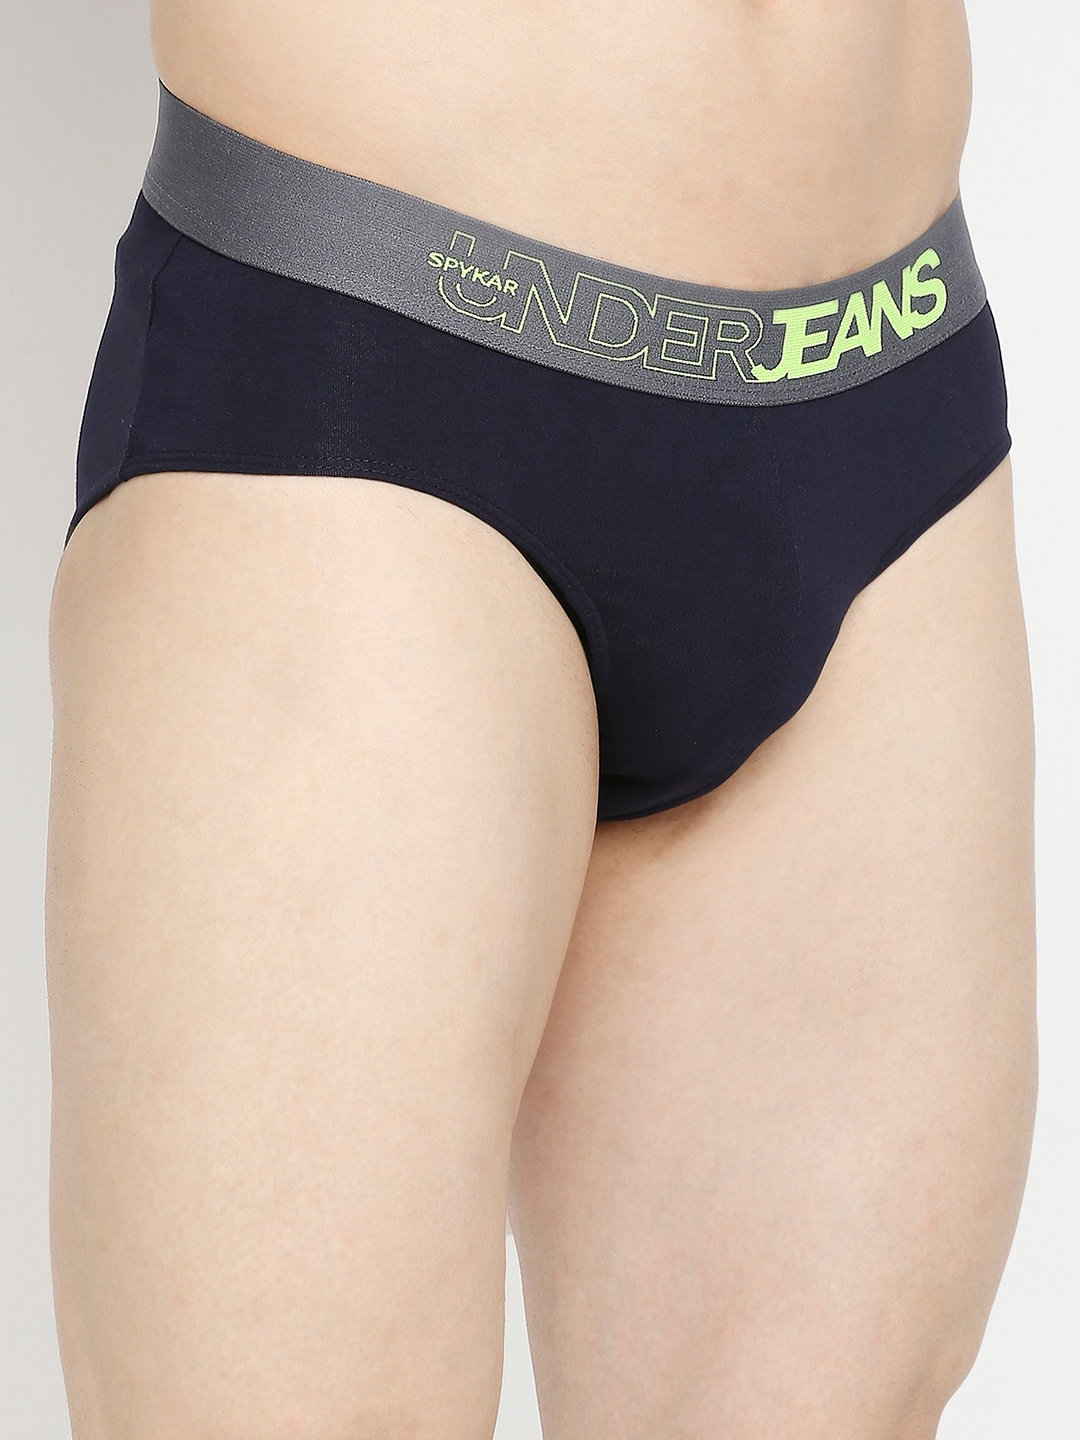 Underjeans By Spykar Navy Blue & Olive Cotton Blend Brief - Pack Of 2